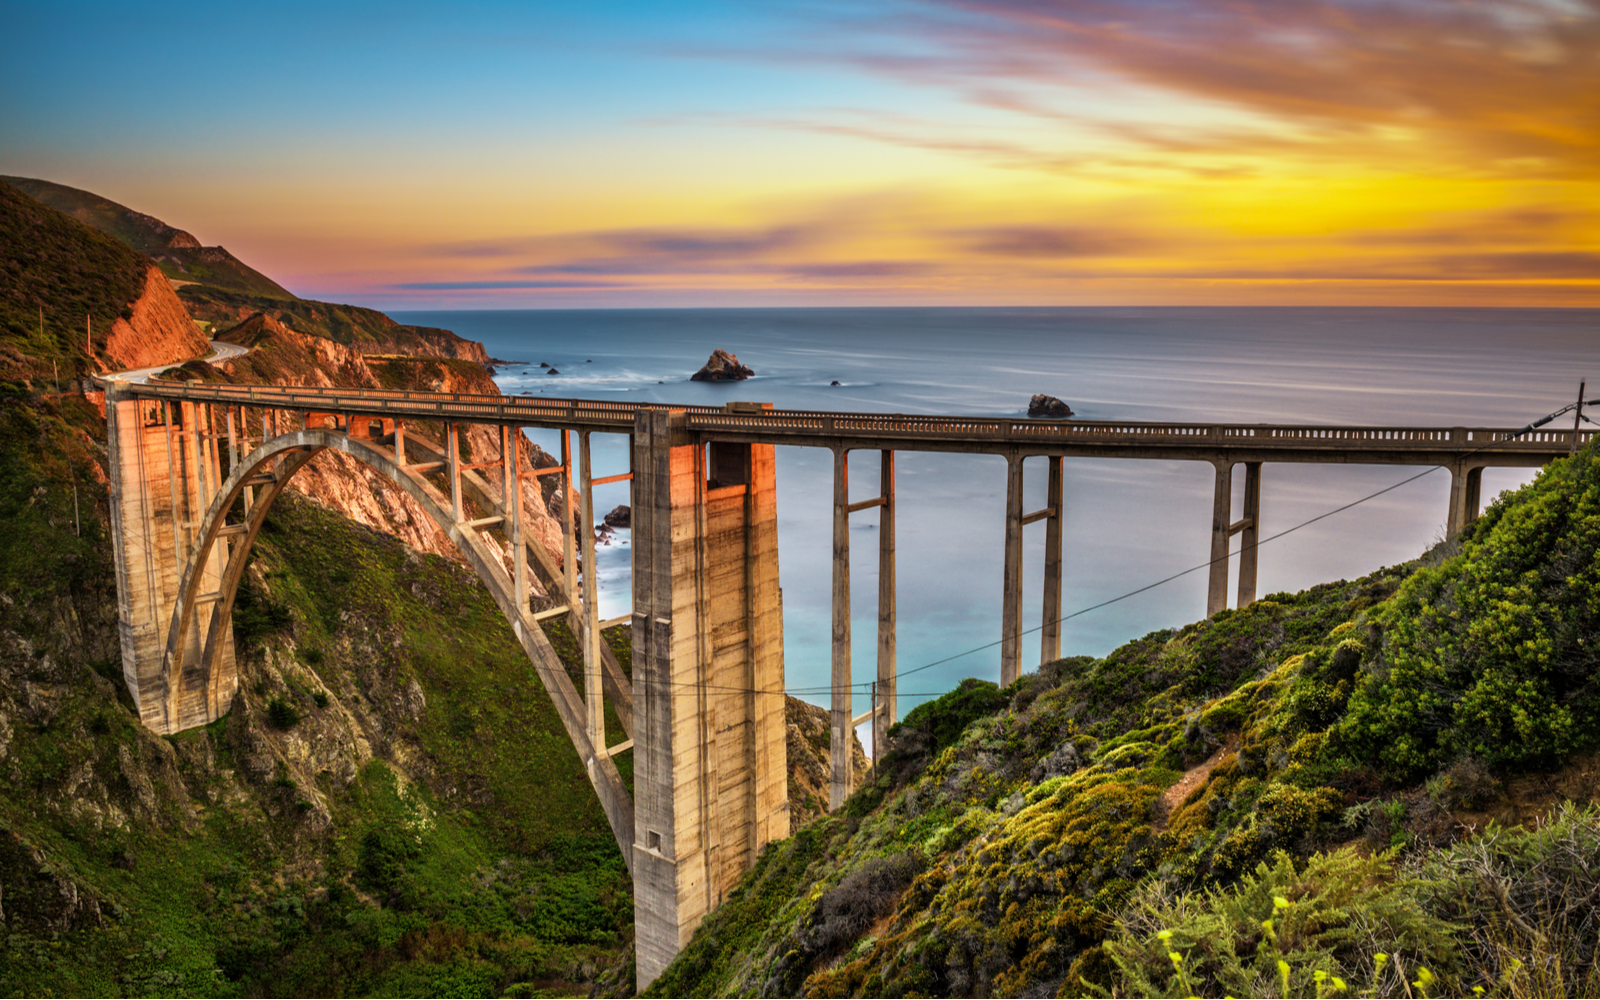 Bixby Bridge pictured above the valley below the sunset over the ocean for a piece on the best things to do in California